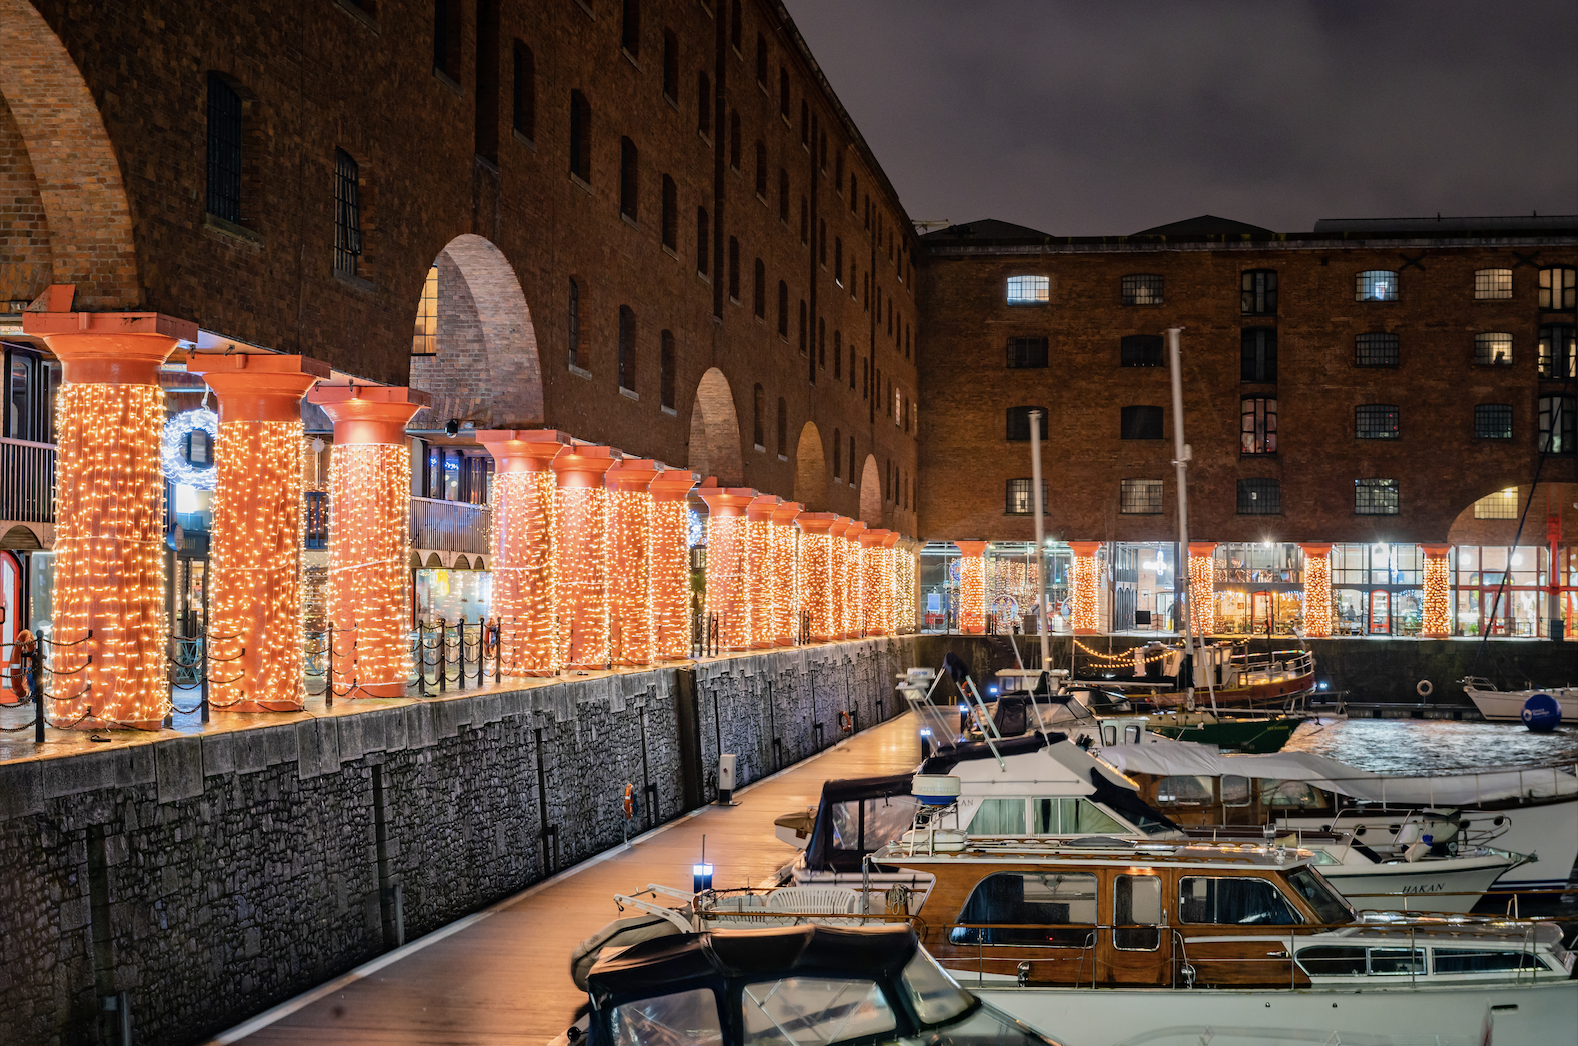 Fairy lights on the inner columns at the royal albert dock all lit up of a night